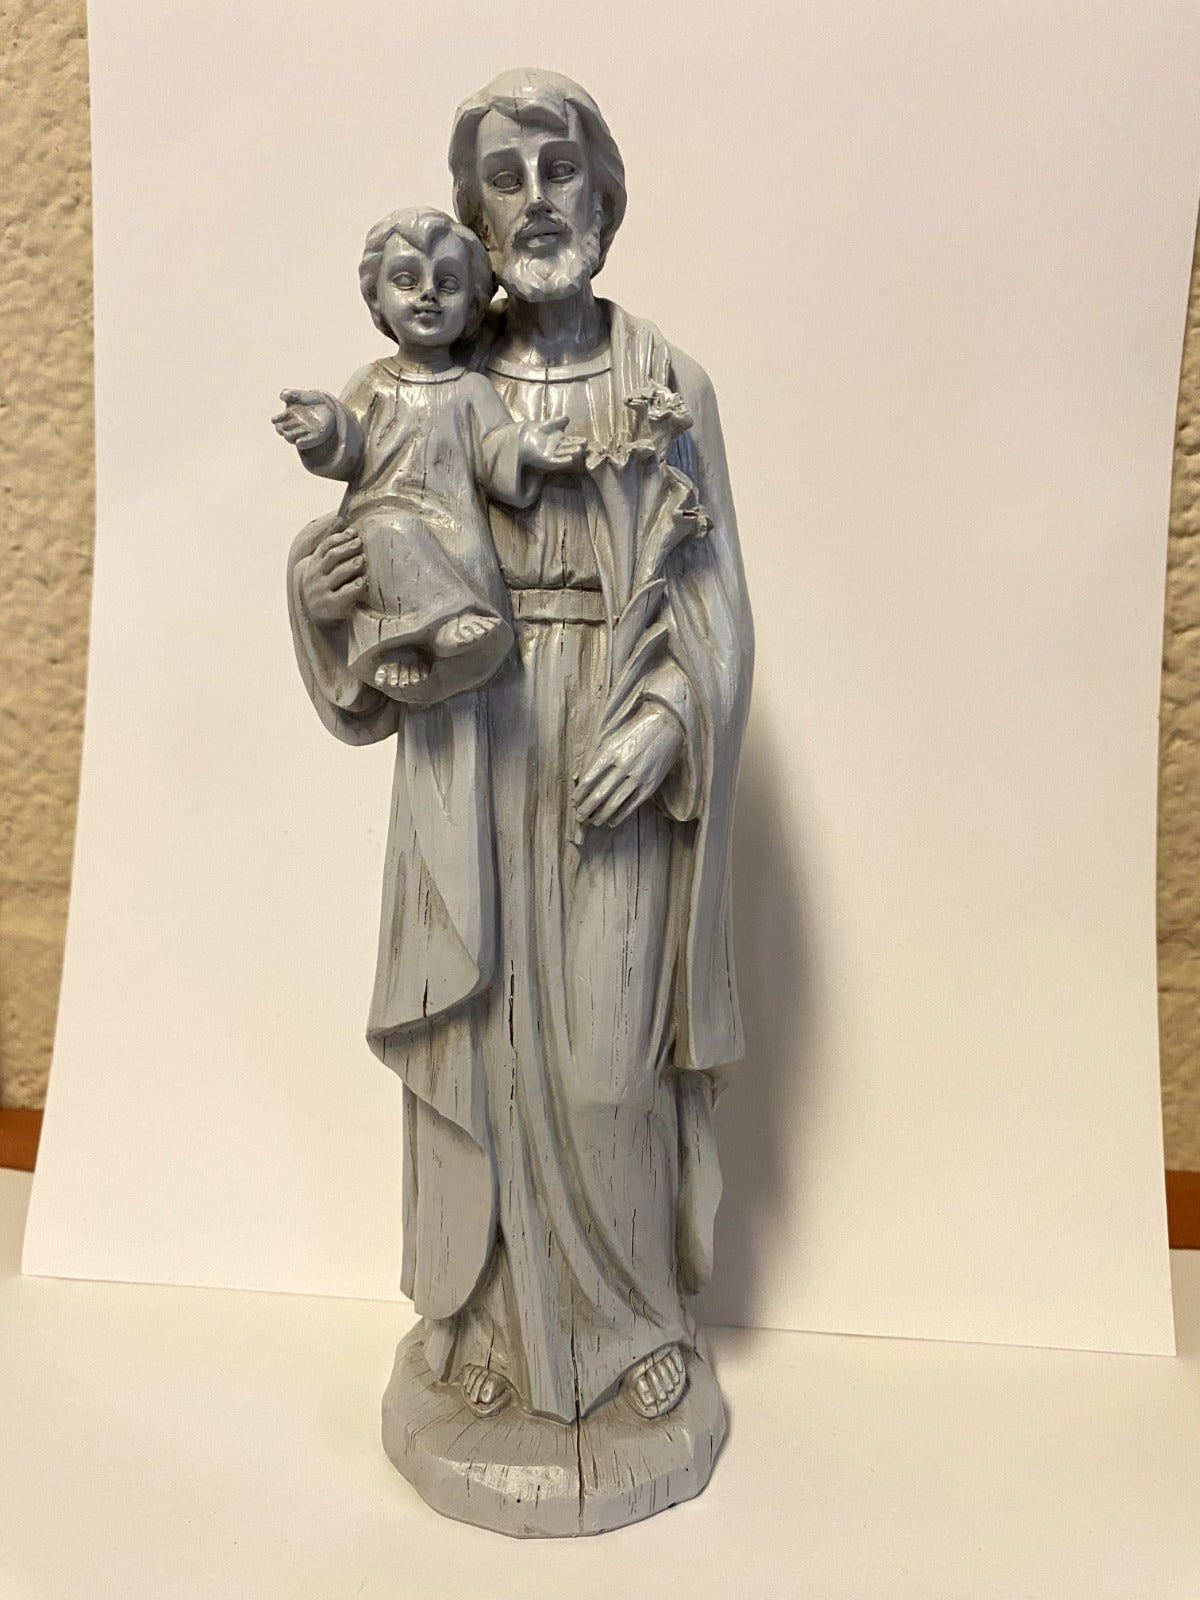 Saint Joseph with Child Stone Finish 8" Statue, New #AB-184 - Bob and Penny Lord